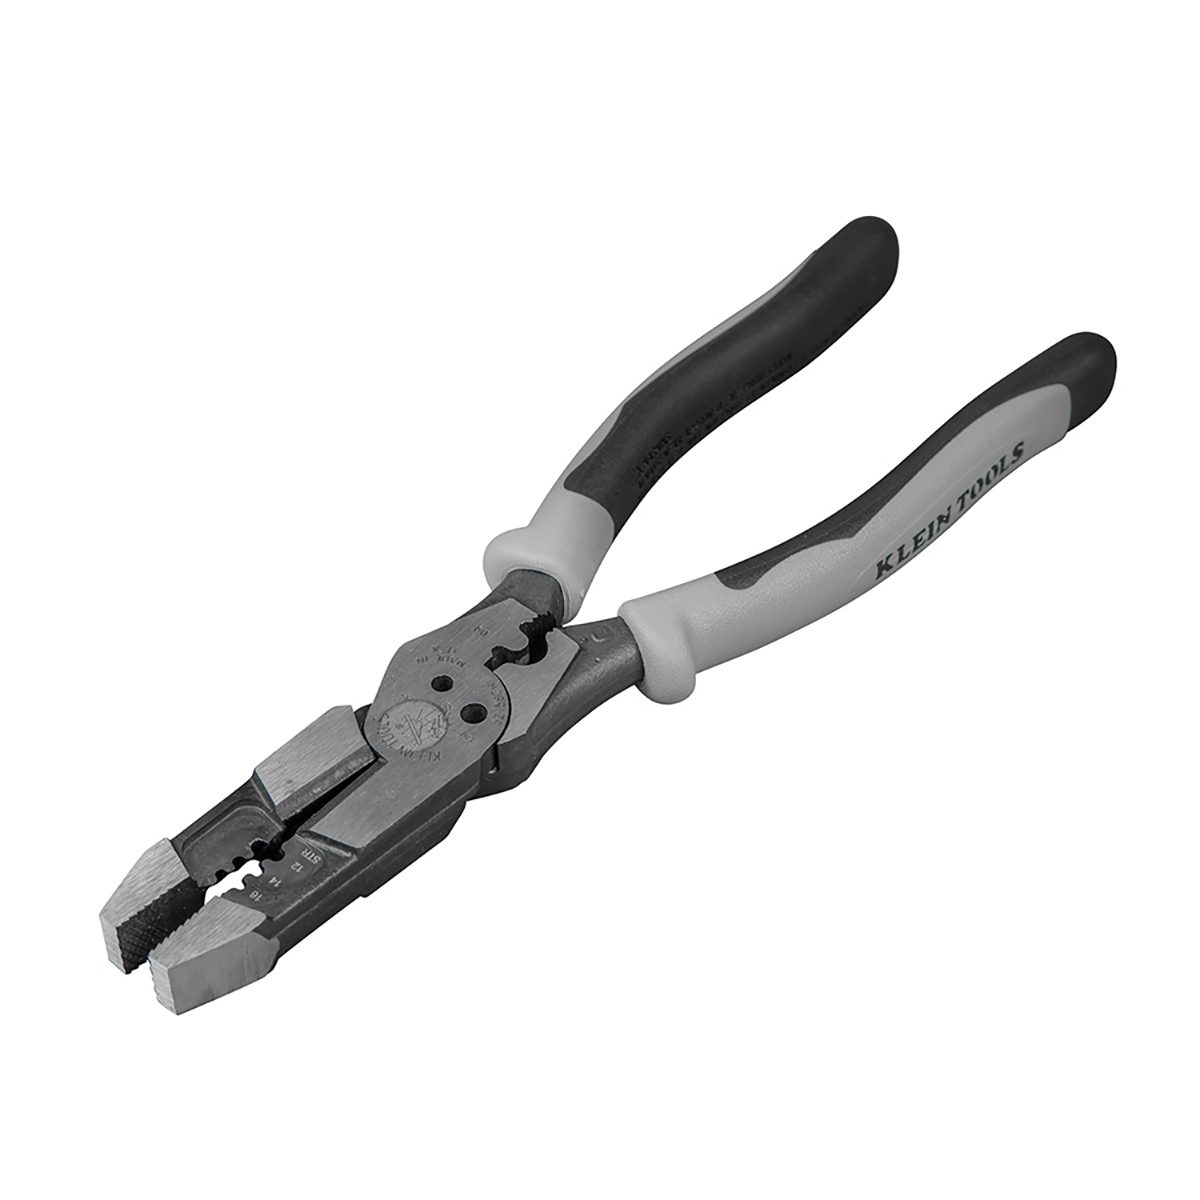 Klein All in One Pliers | Construction Pro Tips